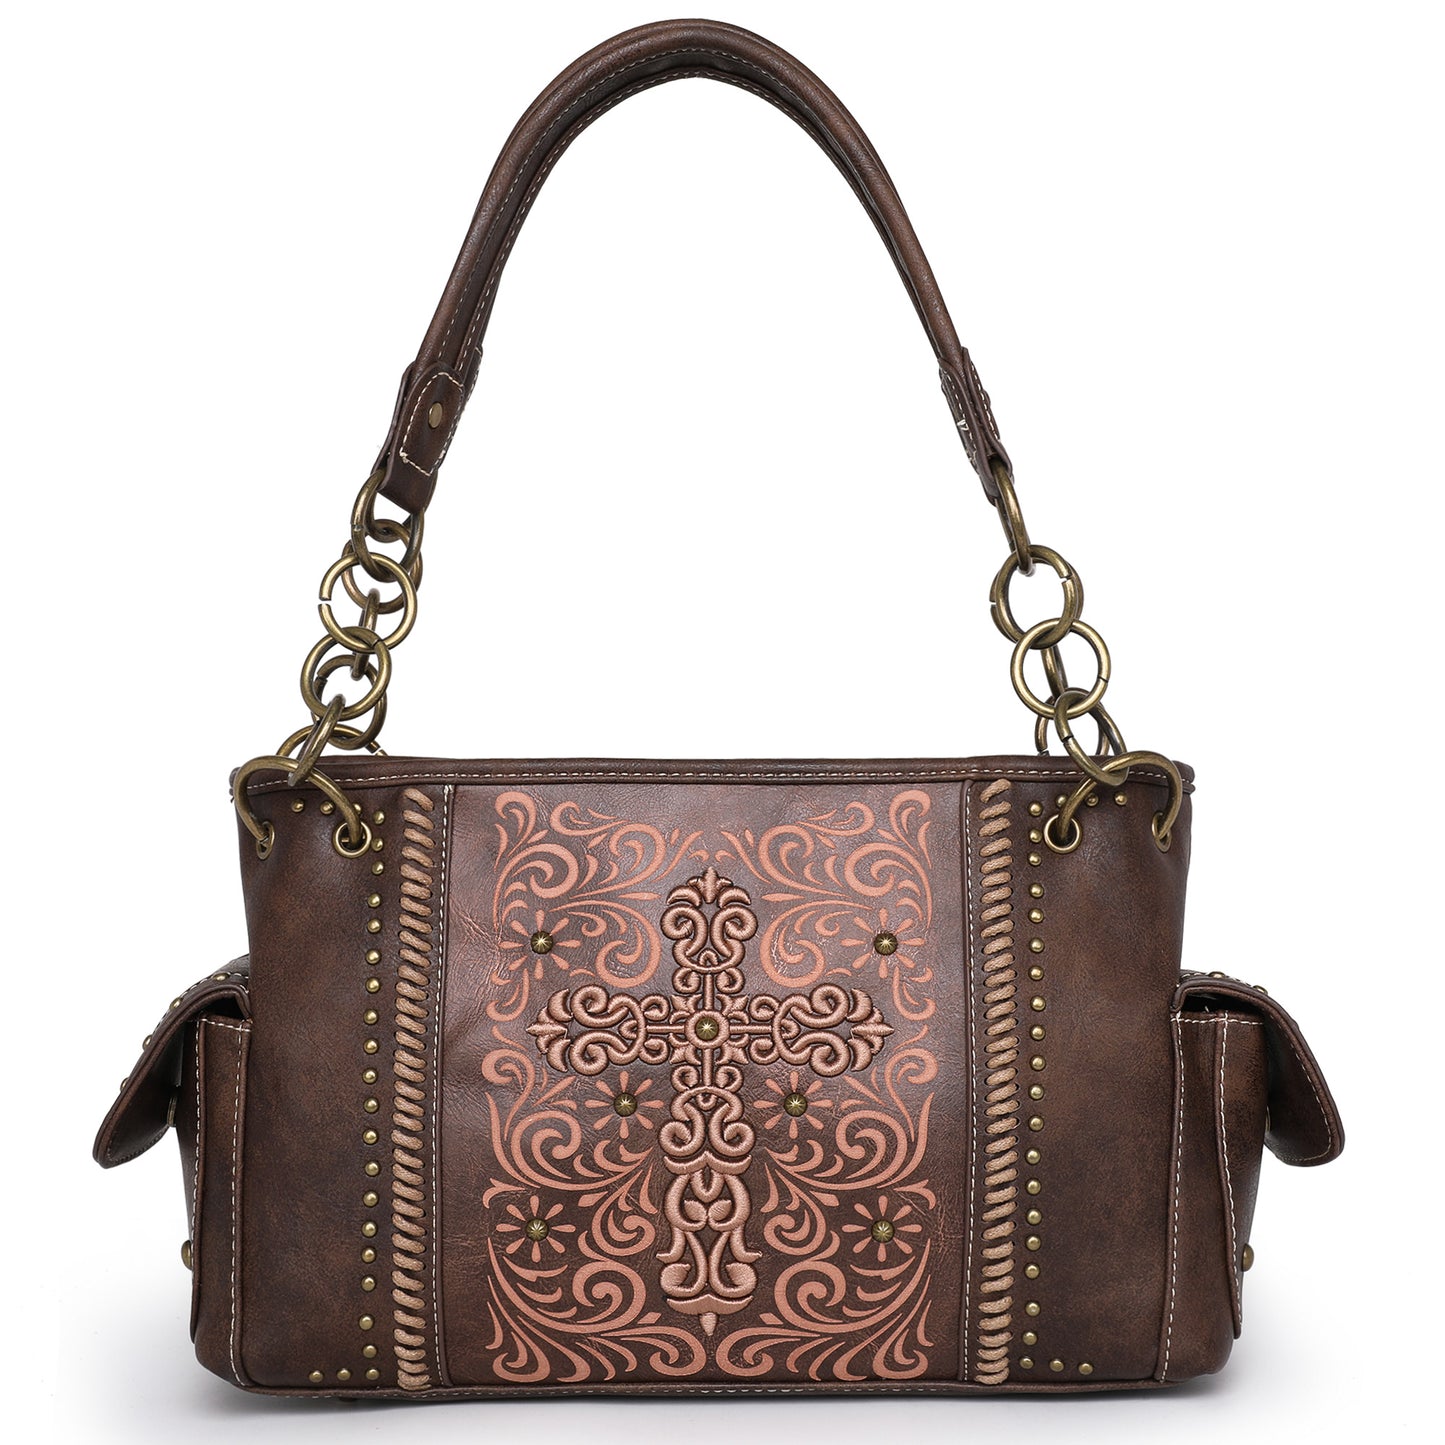 Montana West Women‘s’ Concealed Carry Satchel Purses and Handbags